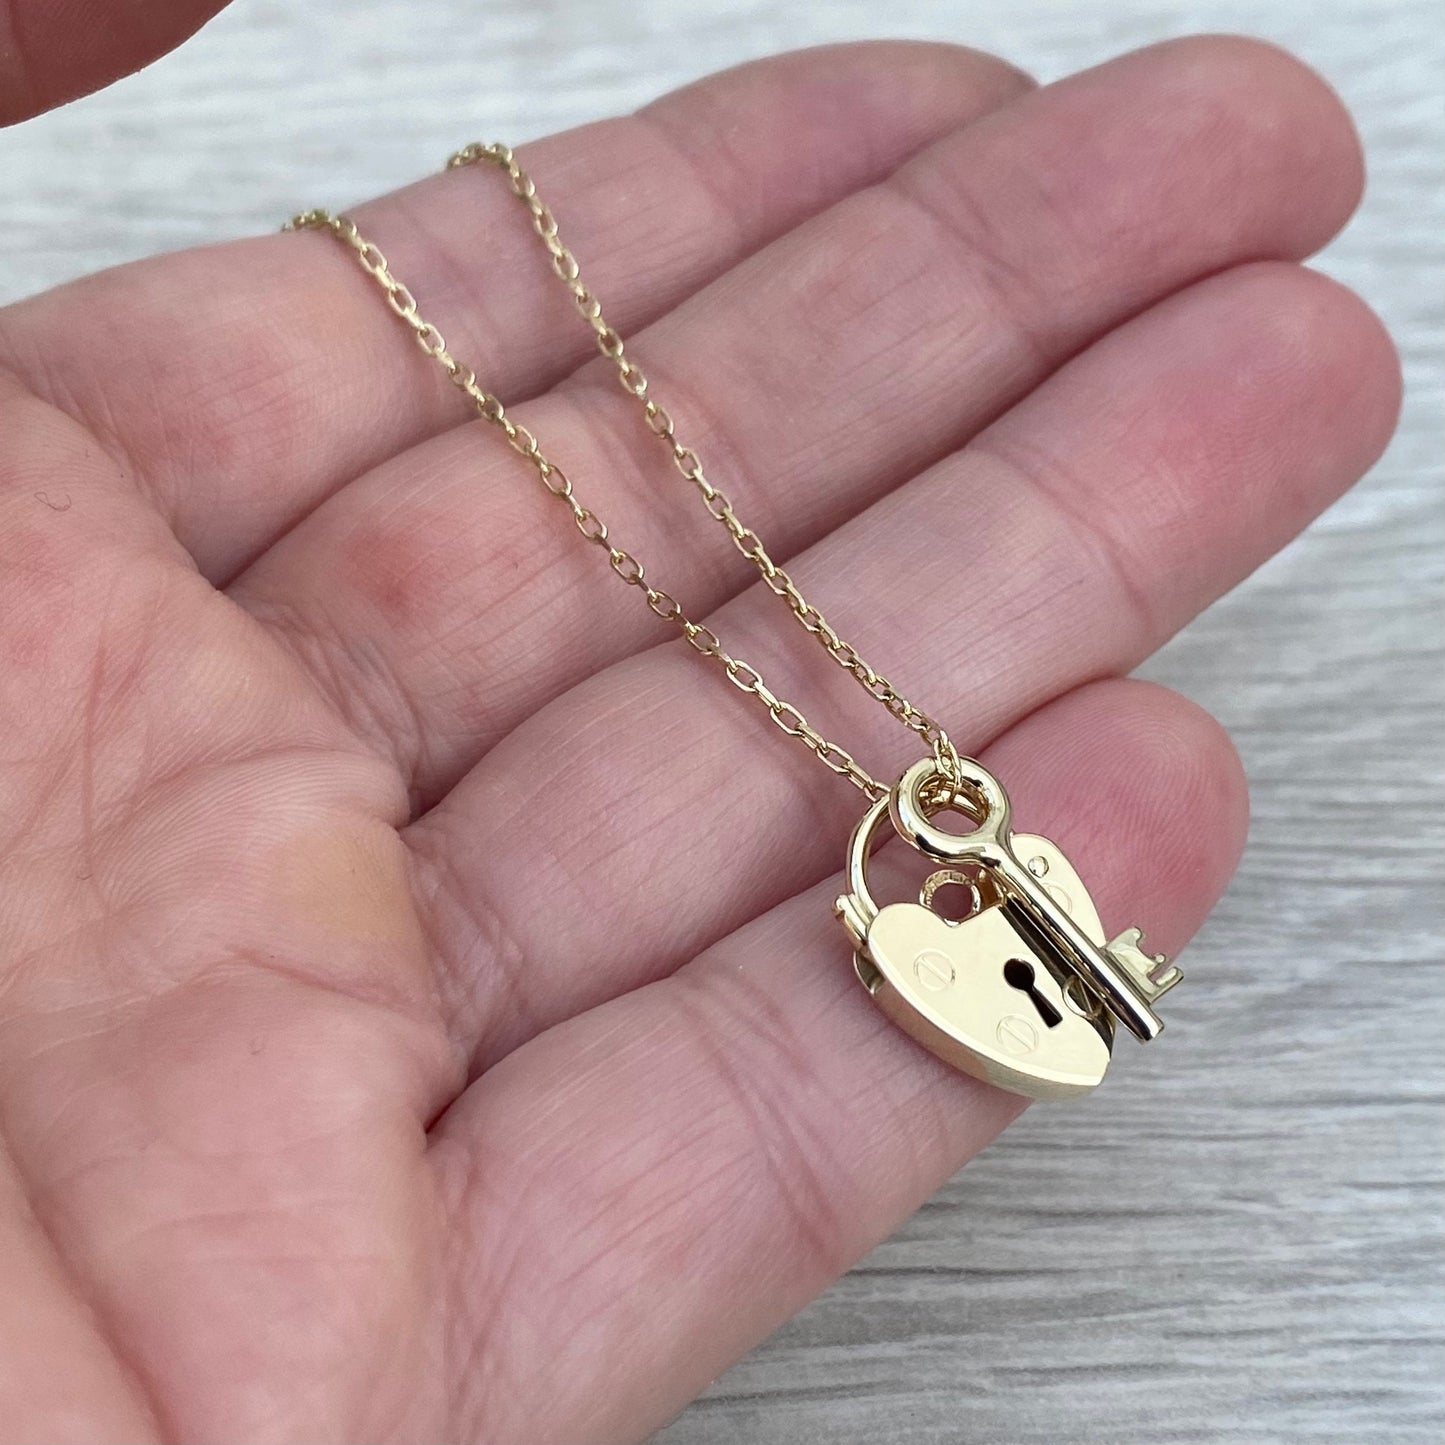 Handmade to order - 9ct solid yellow gold heart padlock and small key charm pendants on a 1.2mm wide trace chain